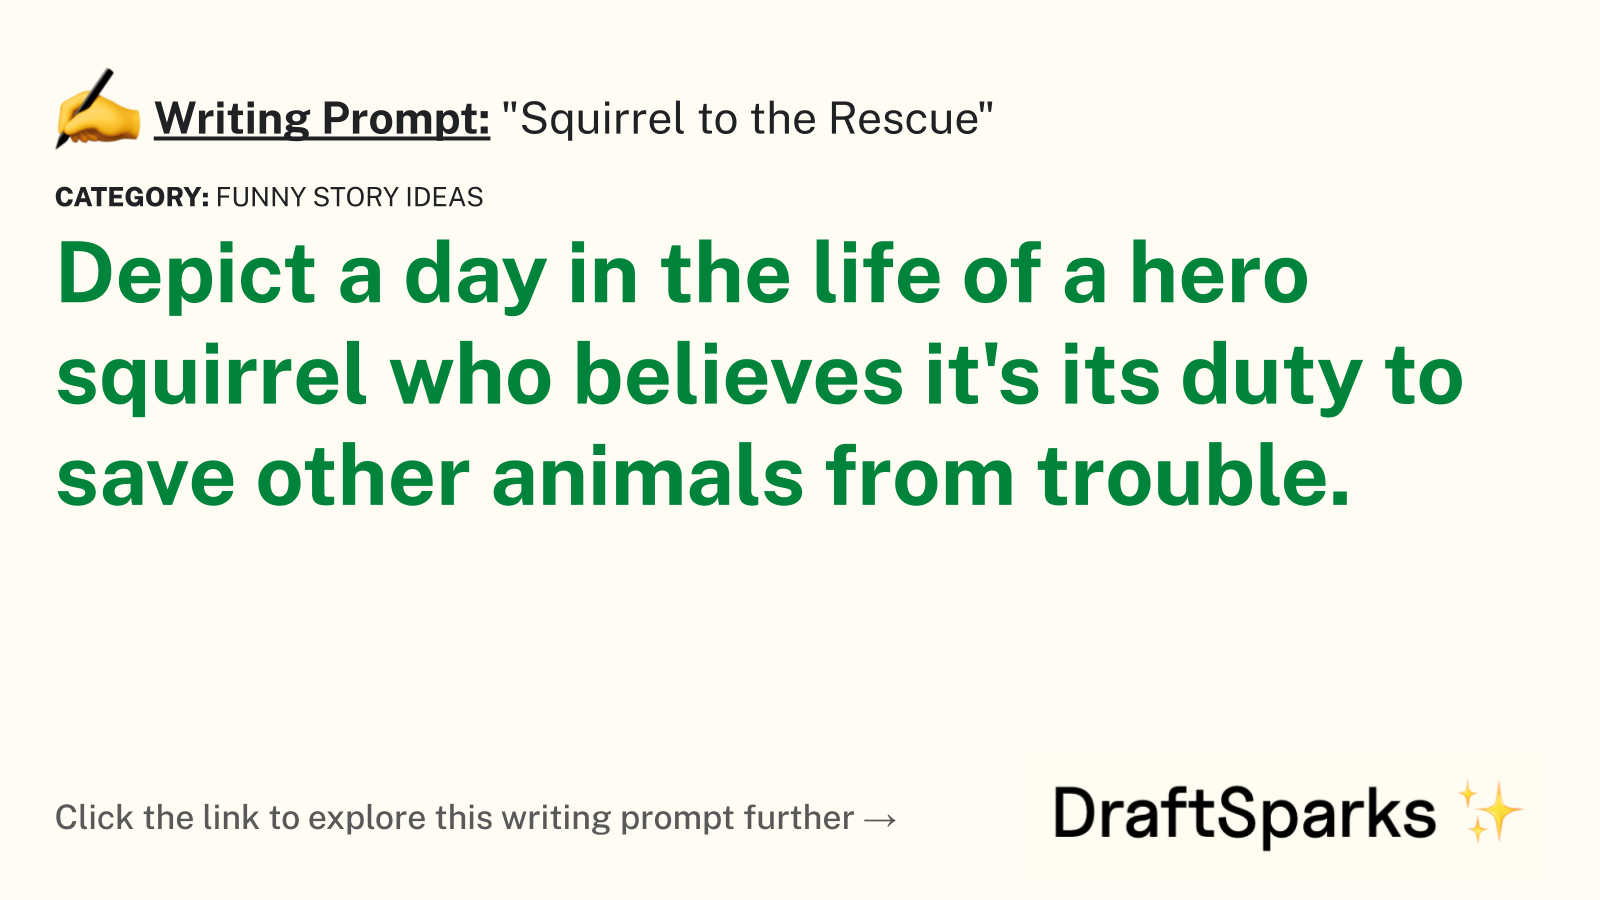 “Squirrel to the Rescue”